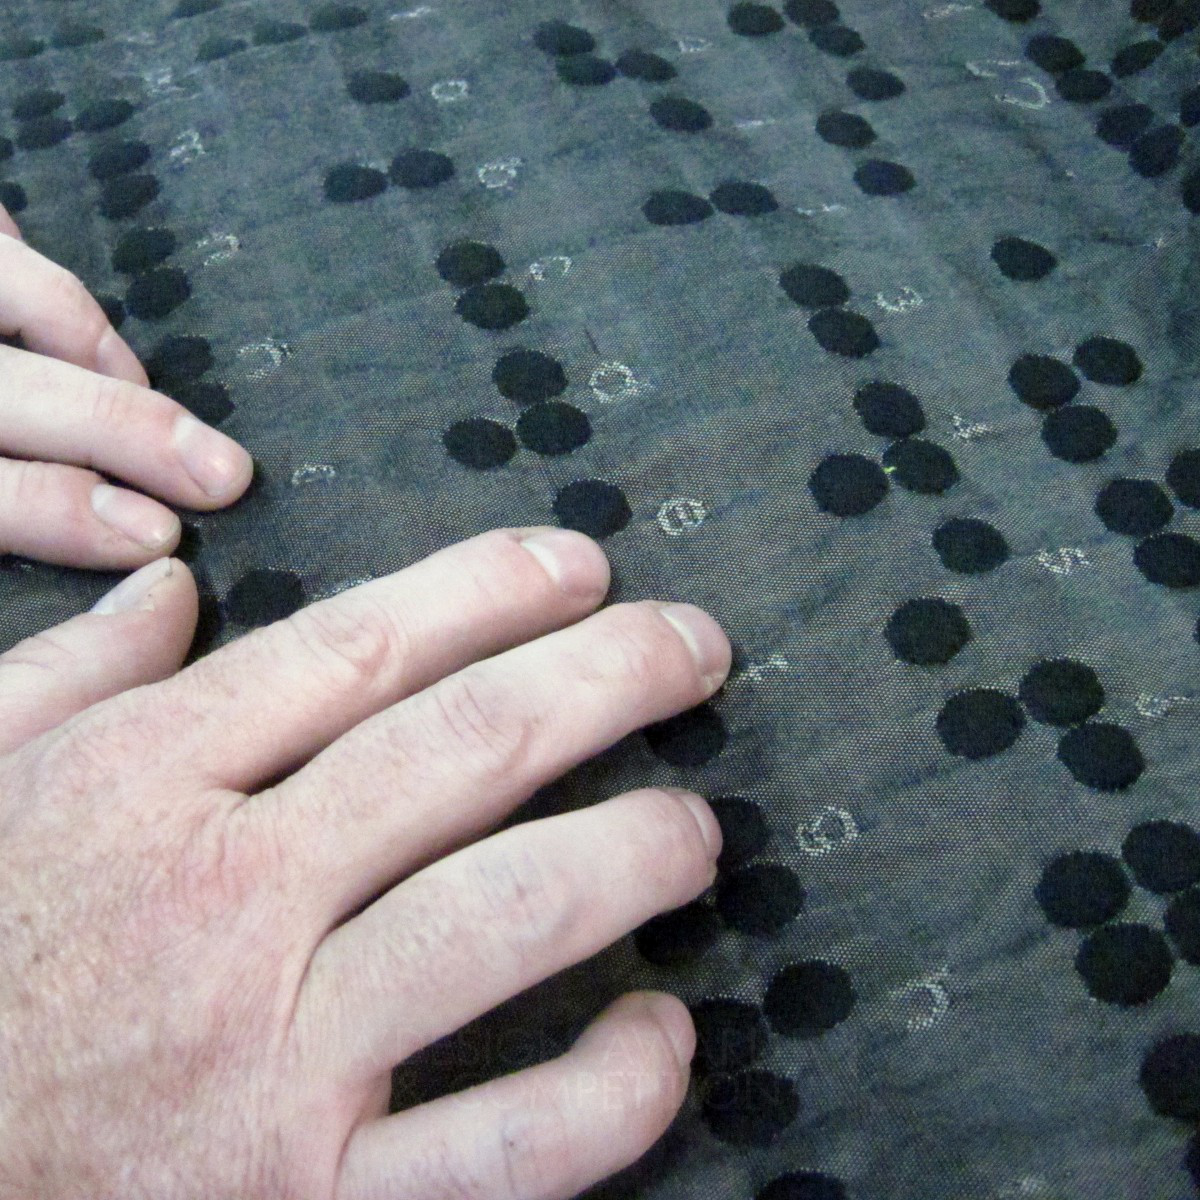 Textile Braille educational - teaching, tactile by Cristina Orozco Cuevas